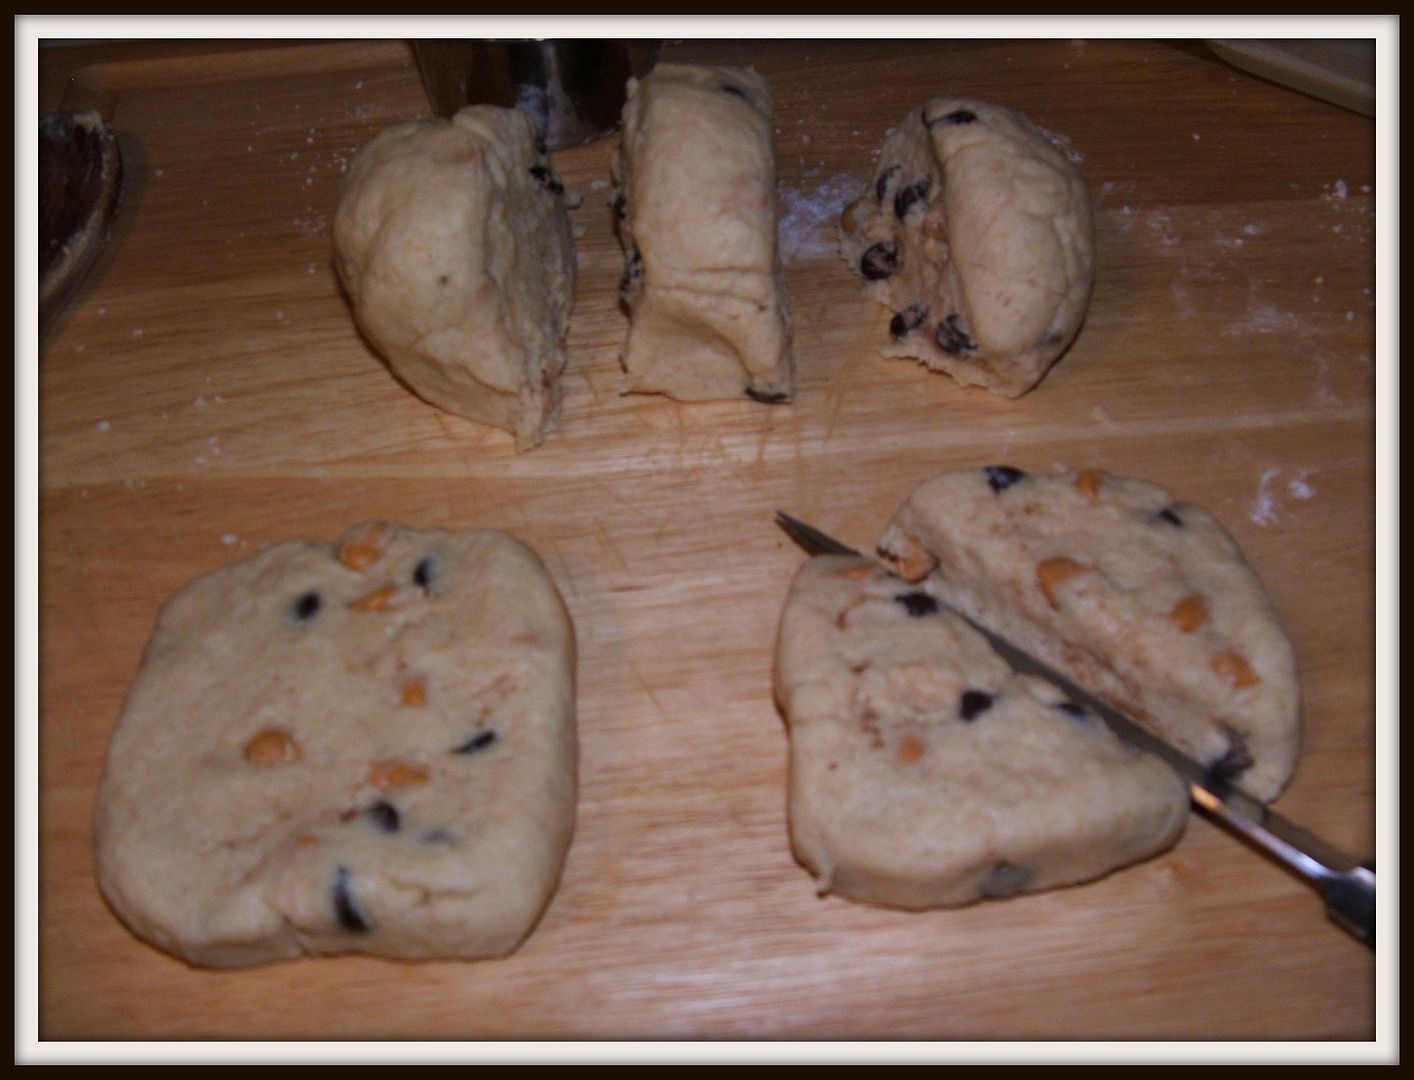 Chocolate & Butterscotch Chip Scones by Angie Ouellette-Tower for godsgrowinggarden.com photo 004_zps265ba7c5.jpg